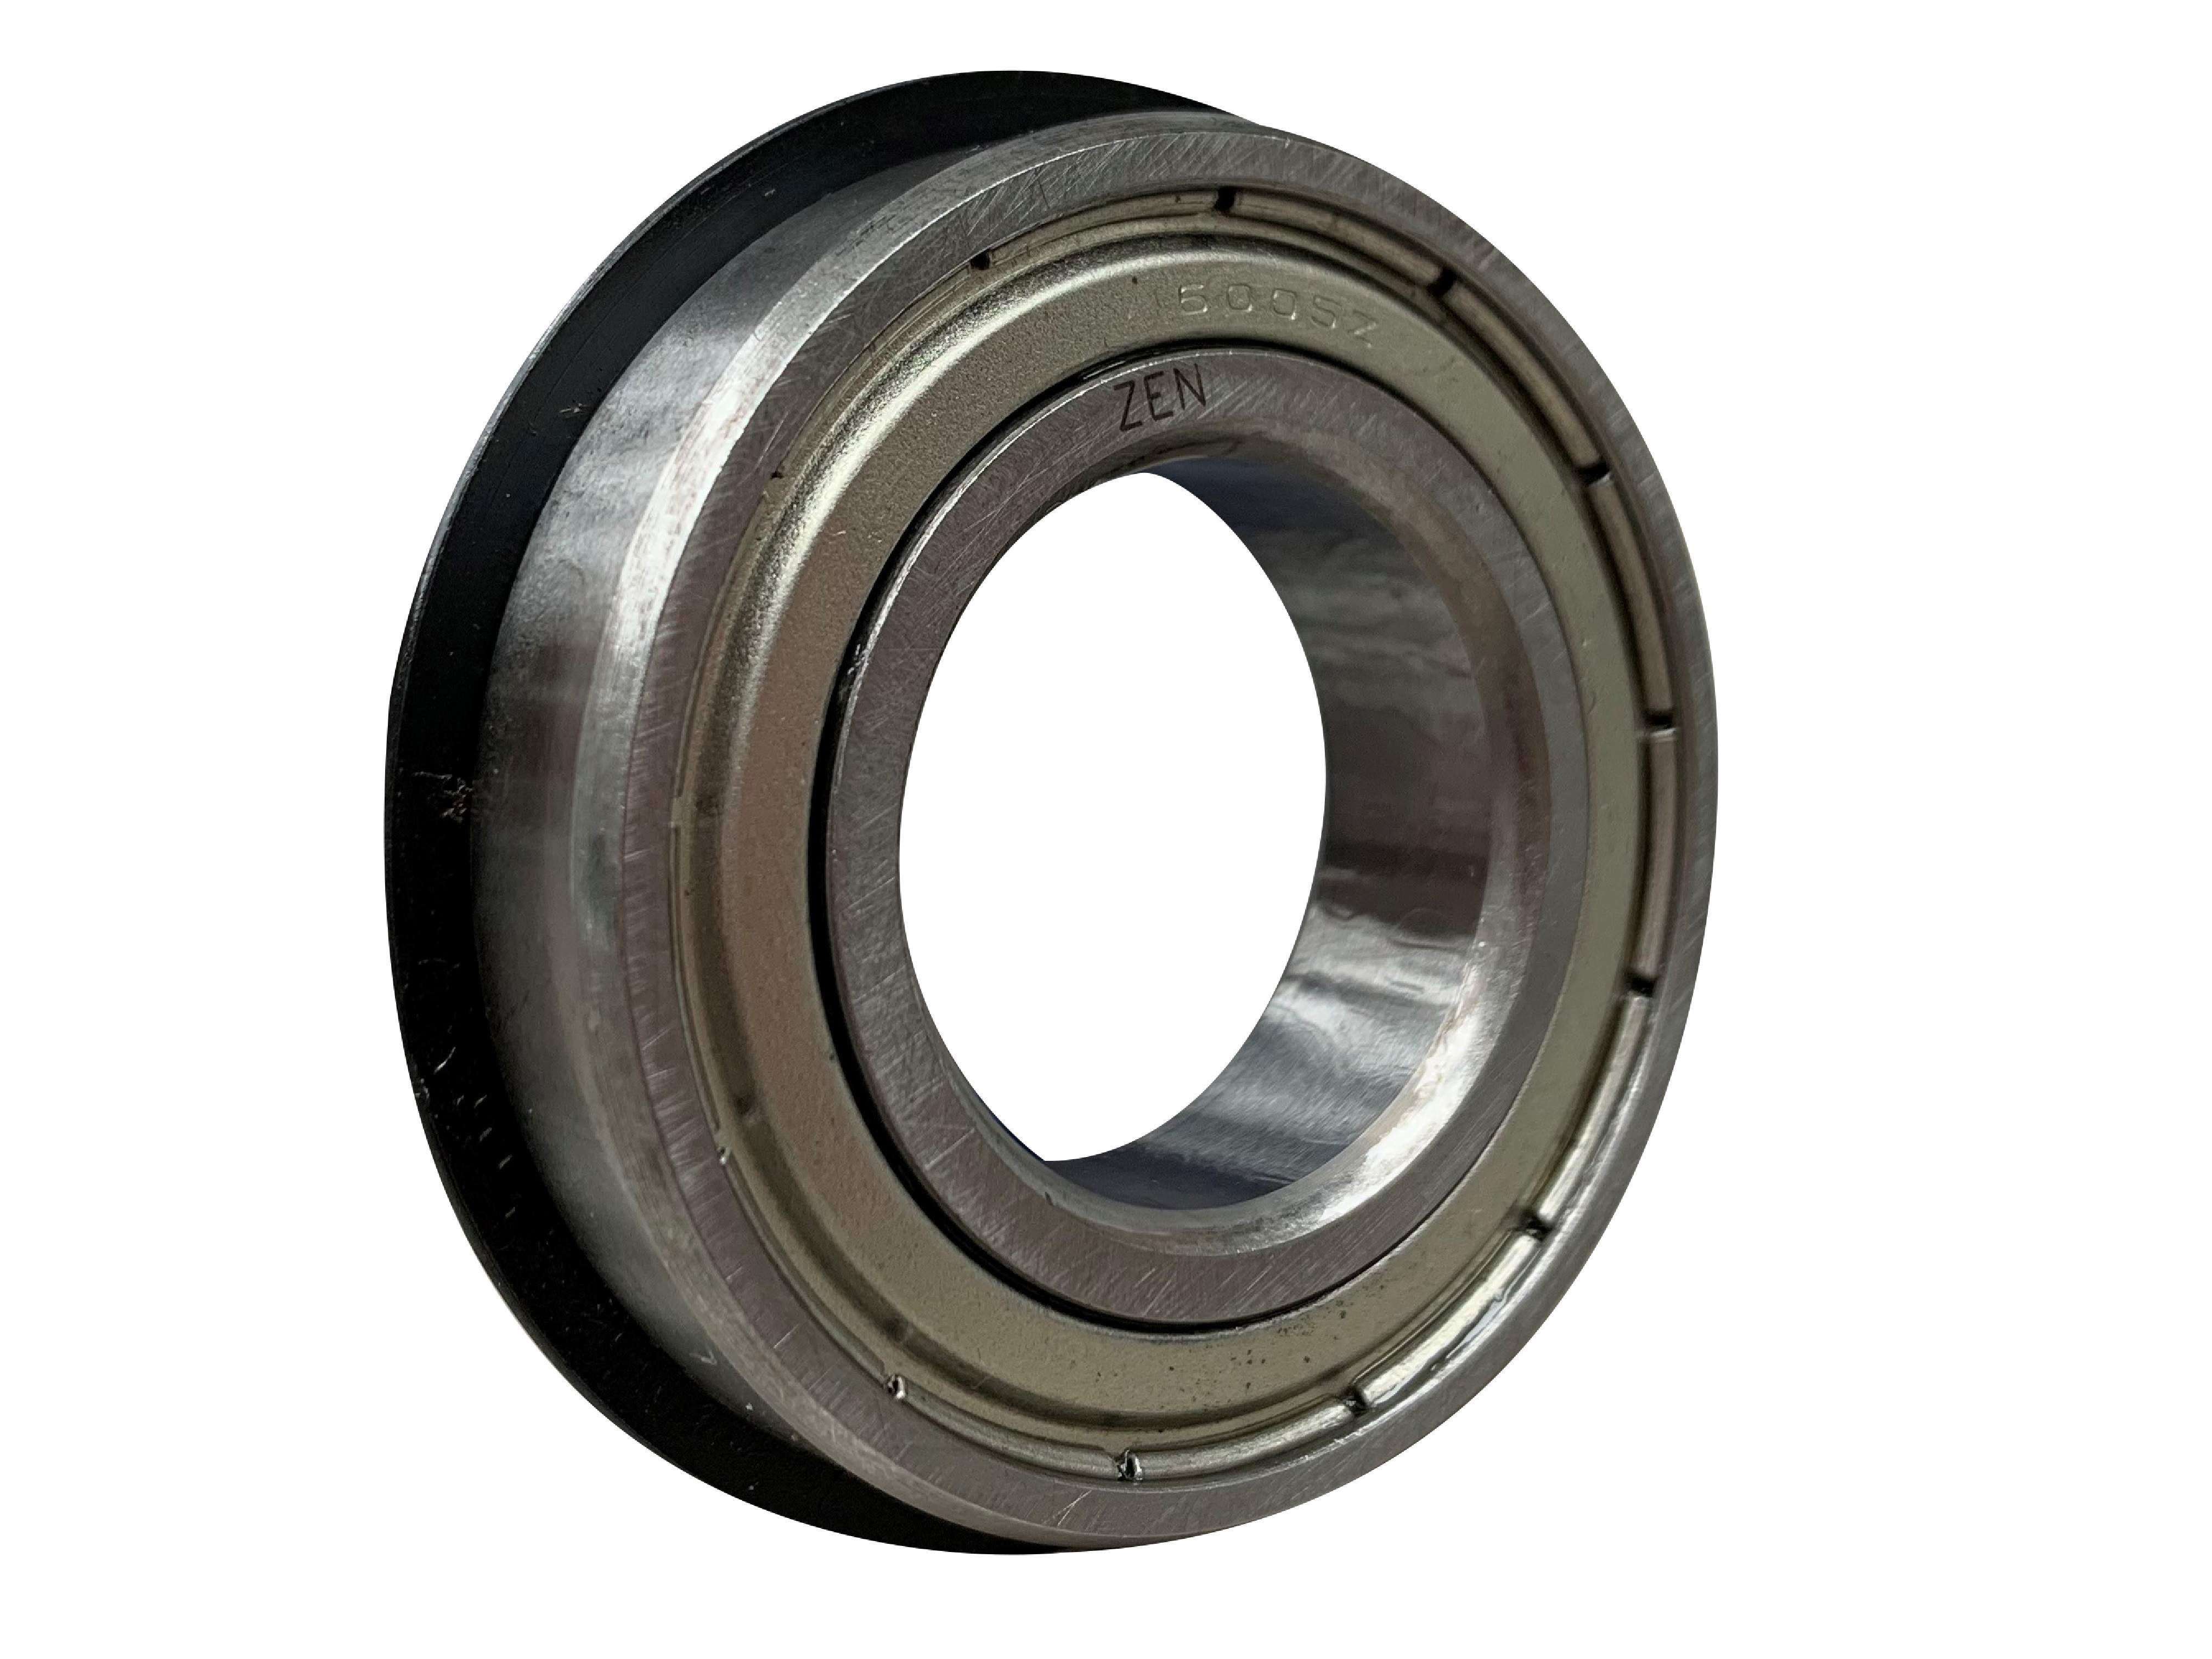 ZEN 6304-2Z-NR Shielded Ball Bearing With Snap Ring 20mm x 52mm x 15mm